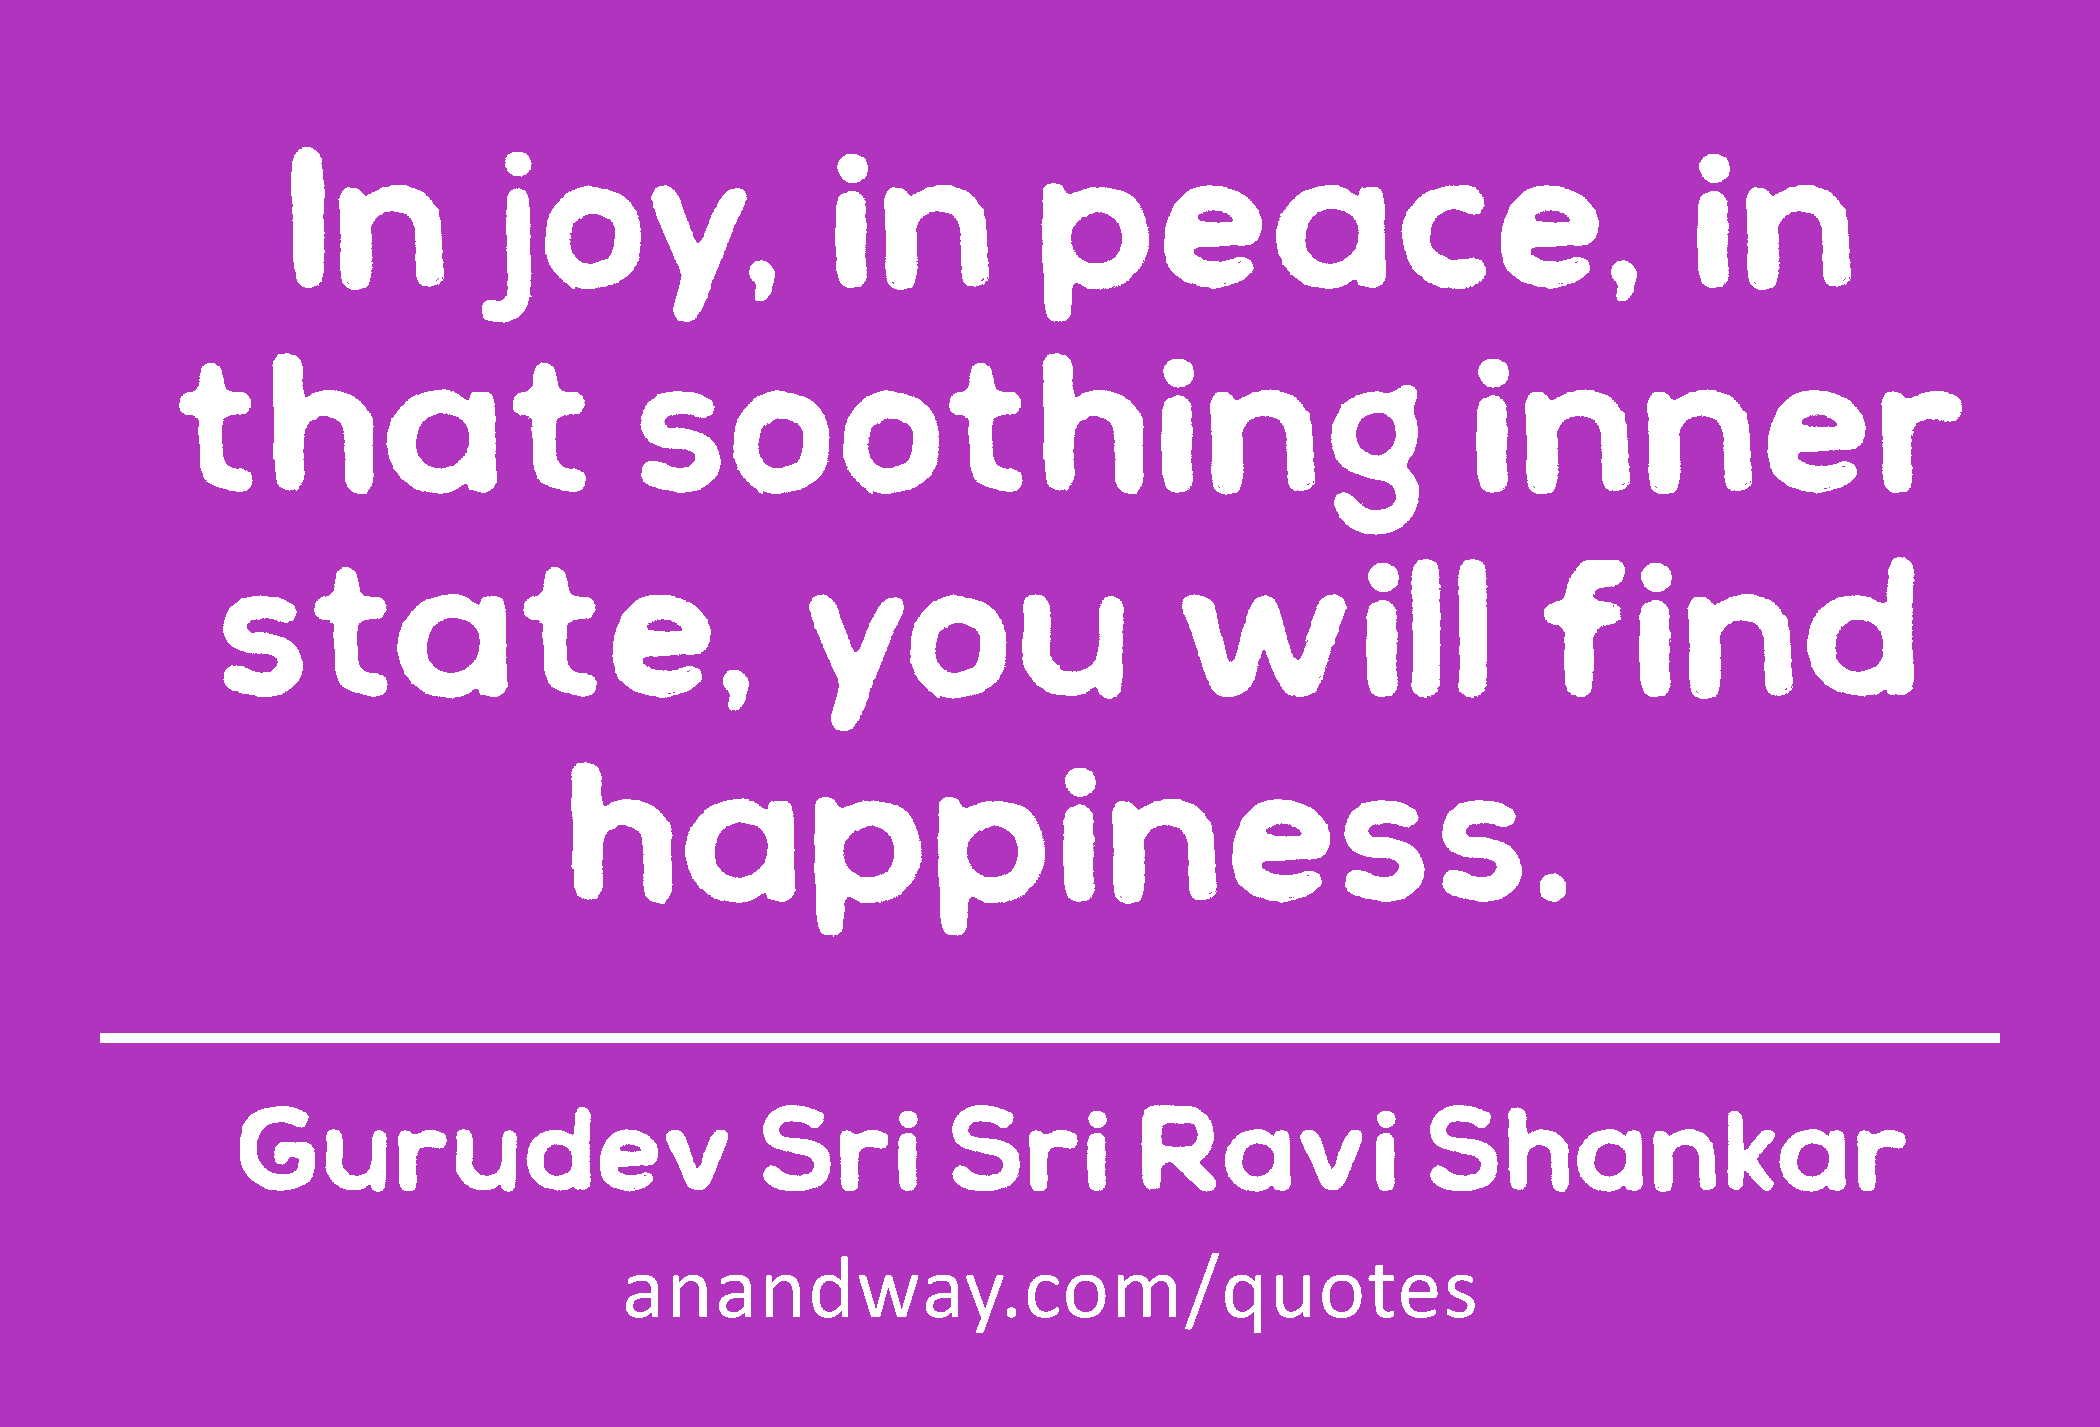 In joy, in peace, in that soothing inner state, you will find happiness. 
 -Gurudev Sri Sri Ravi Shankar